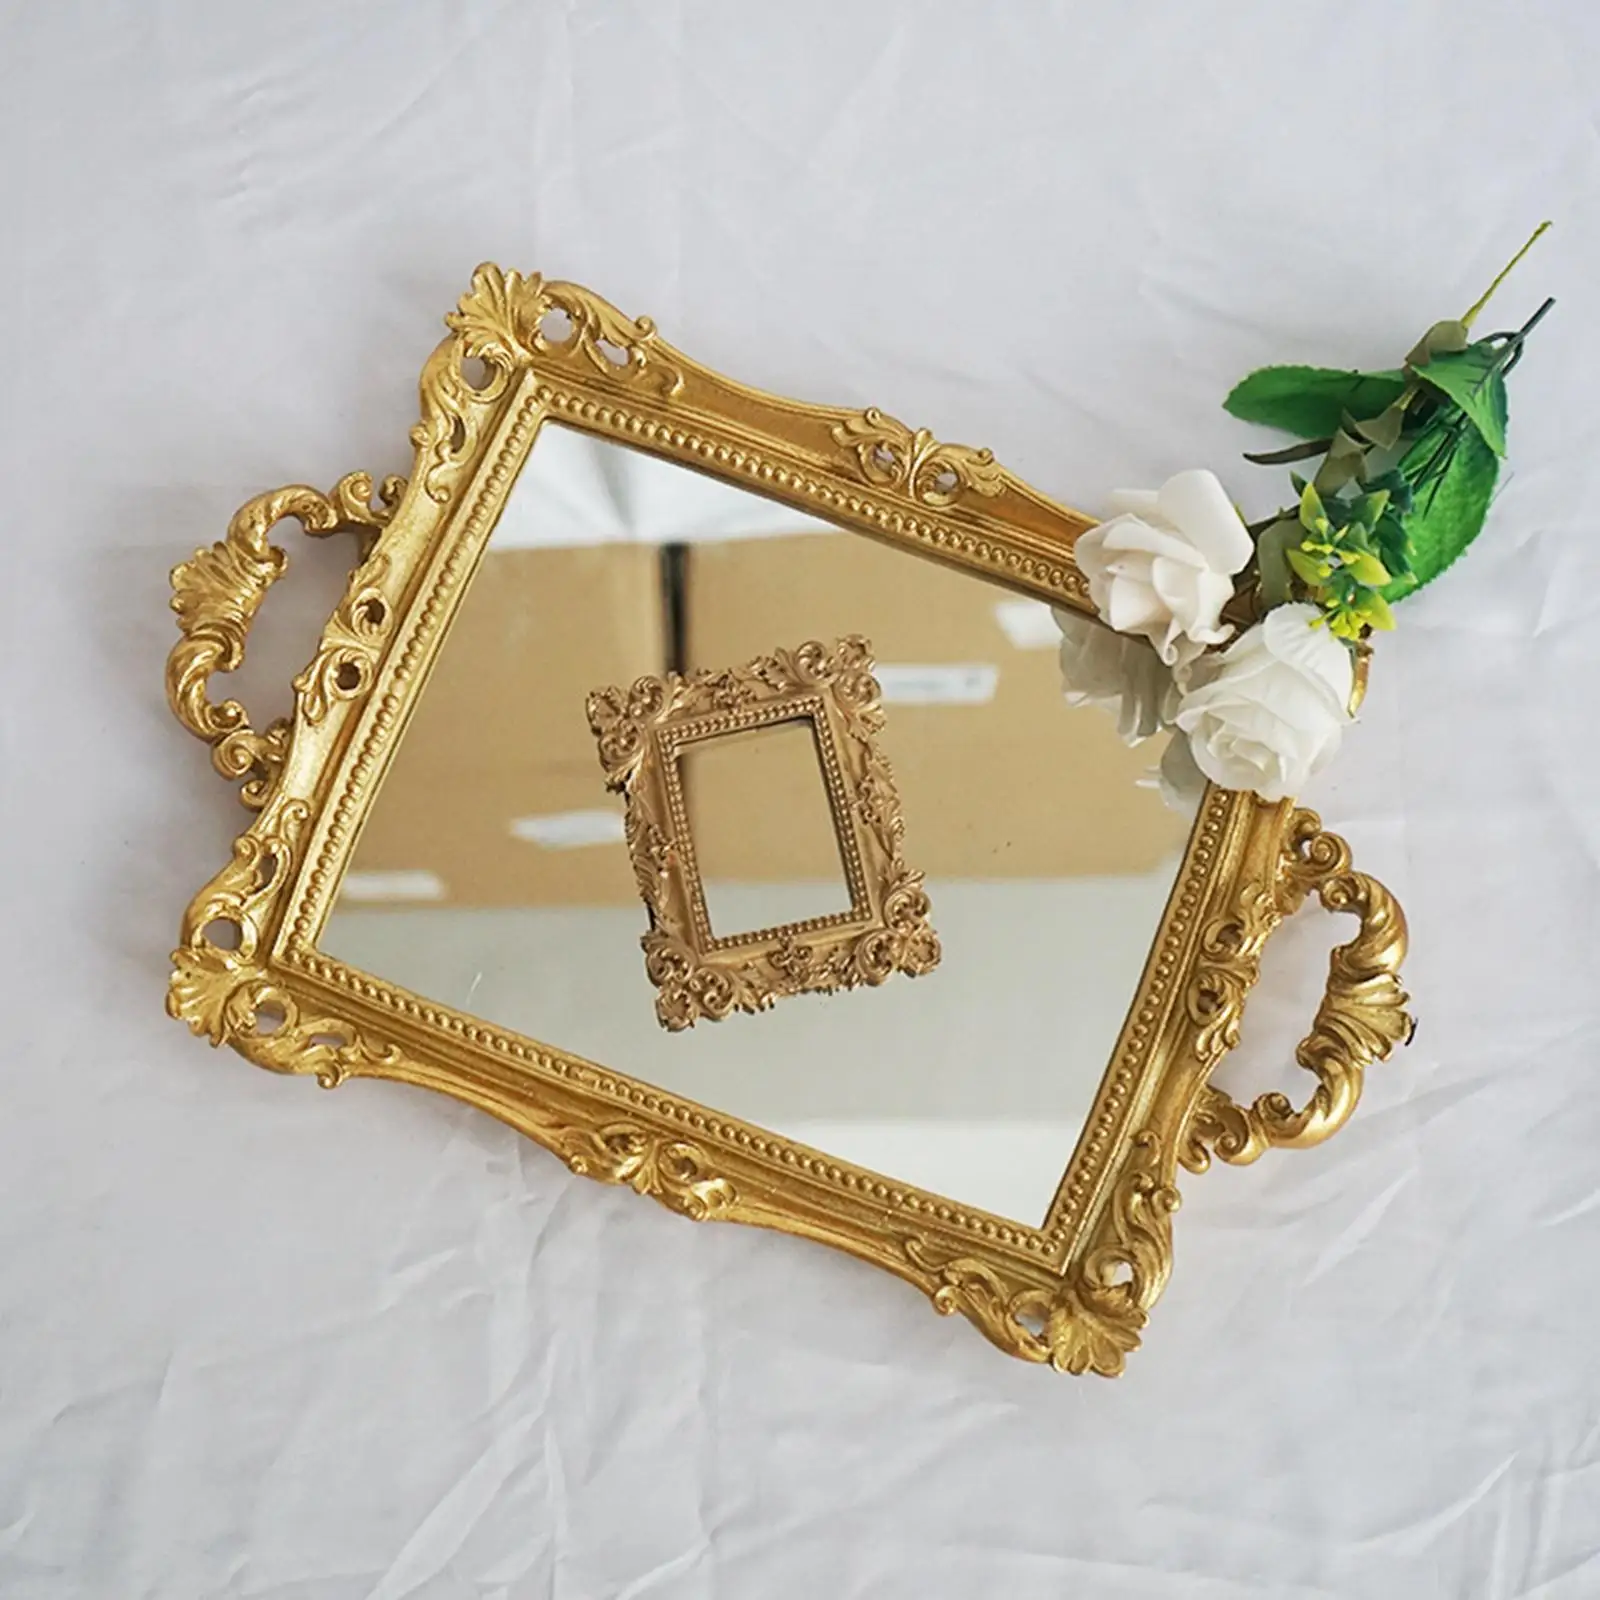 Mirror Tray Golden Serving Tray with Handle for Living Room Coffee Table Home Decor